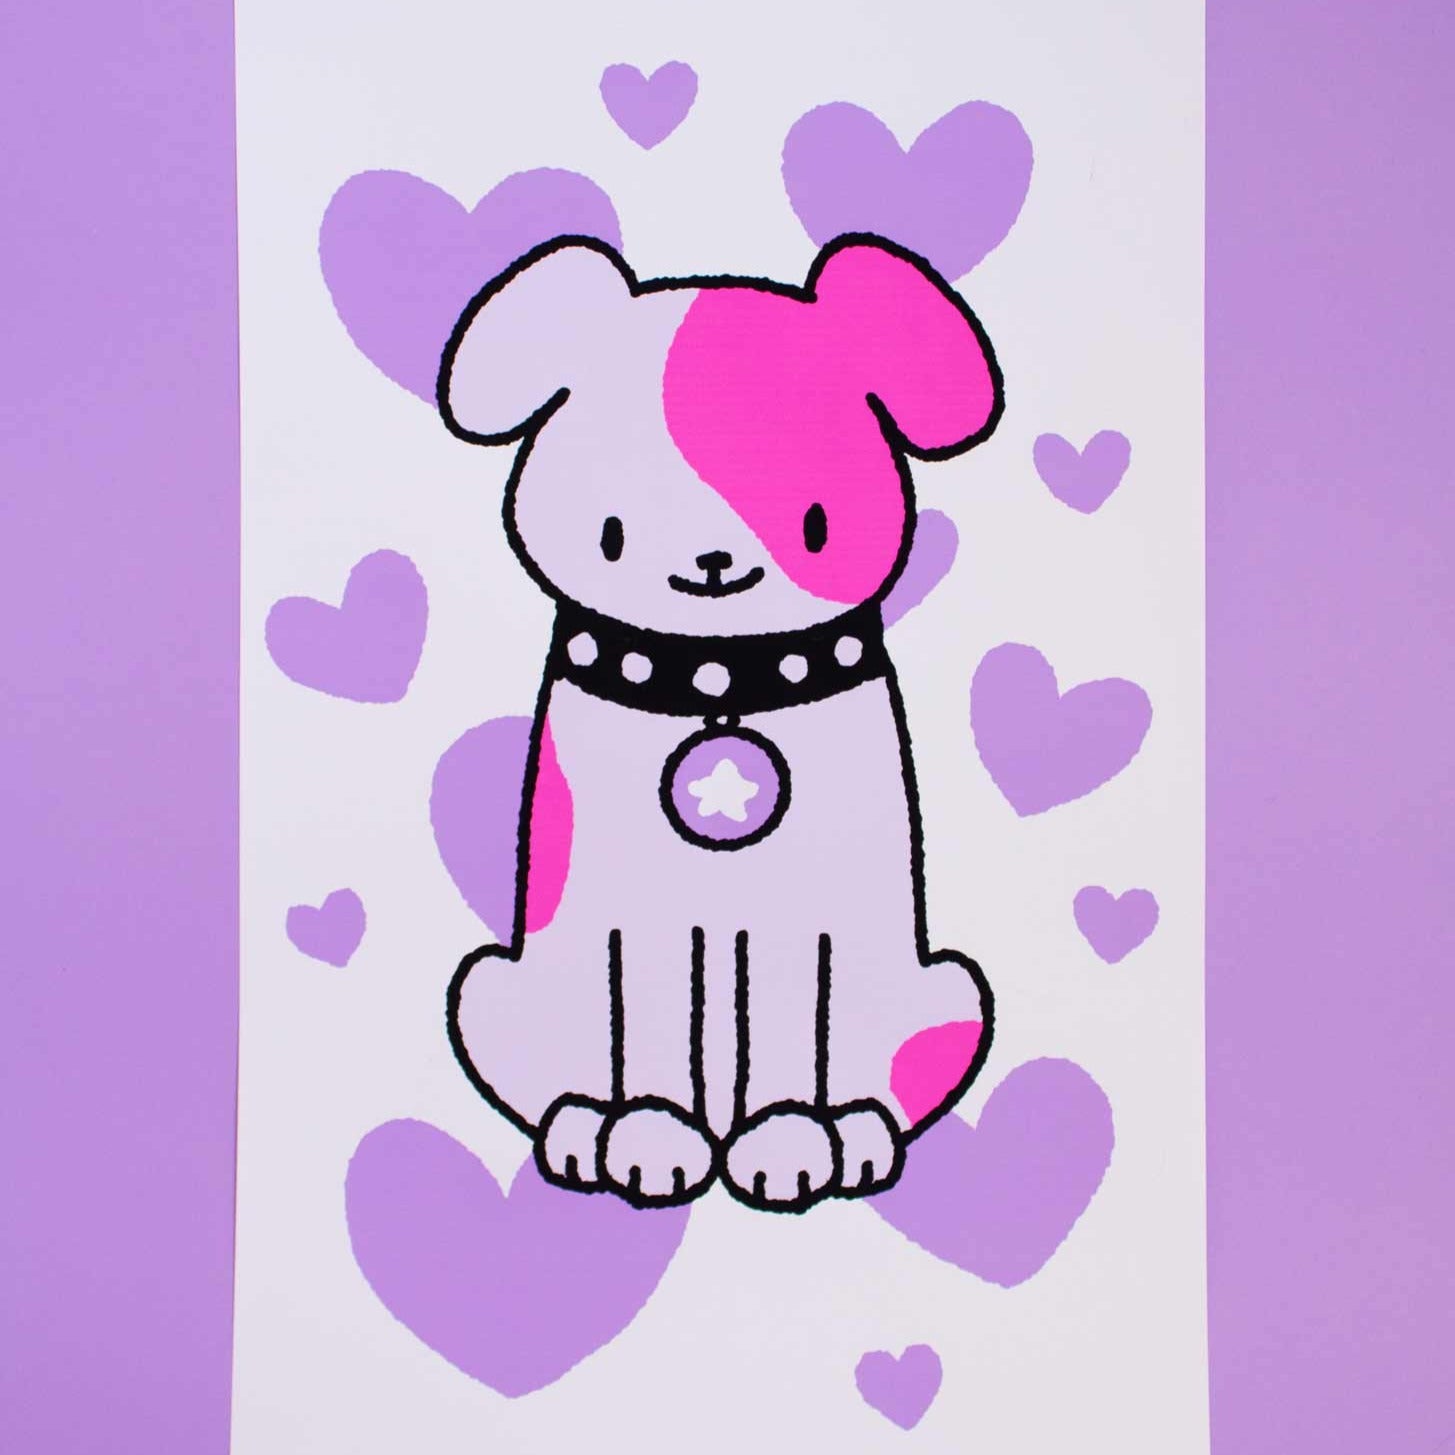 Woof Woof Poster 11x17"